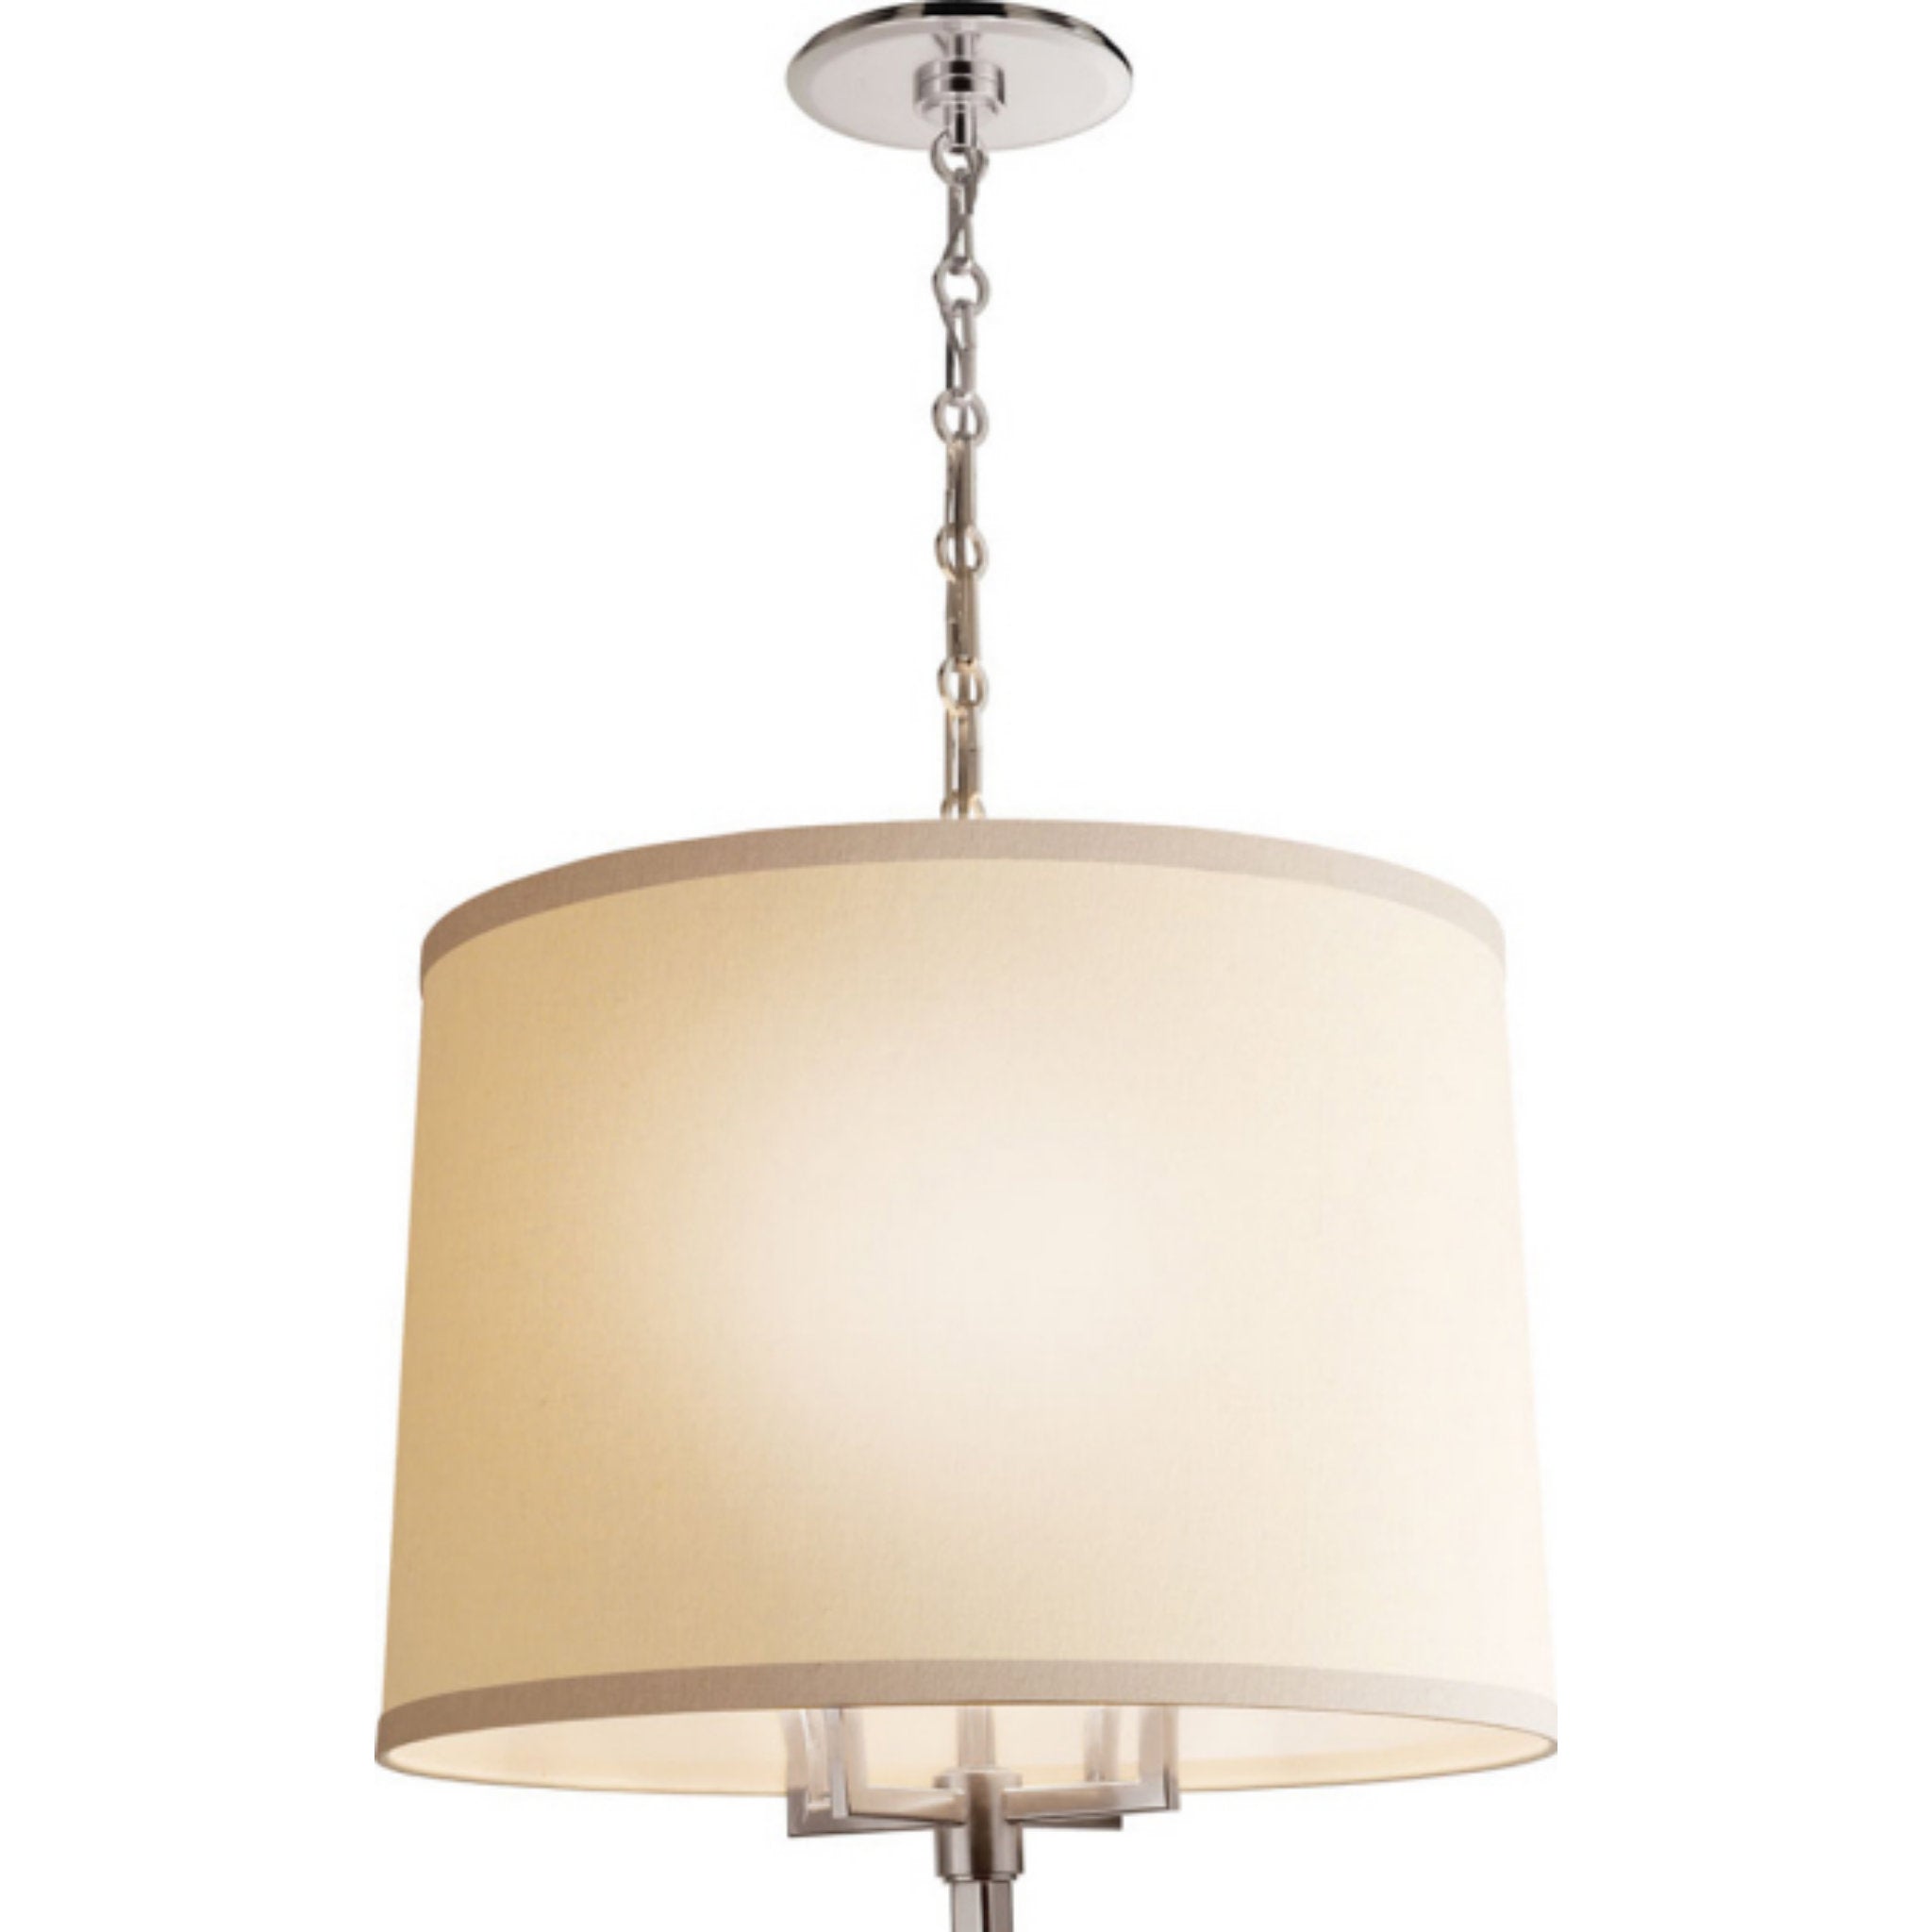 Visual Comfort Signature Collection Barbara Barry Swing Soft Brass Table  Lamp in Linen BBL3070SB-L - Open